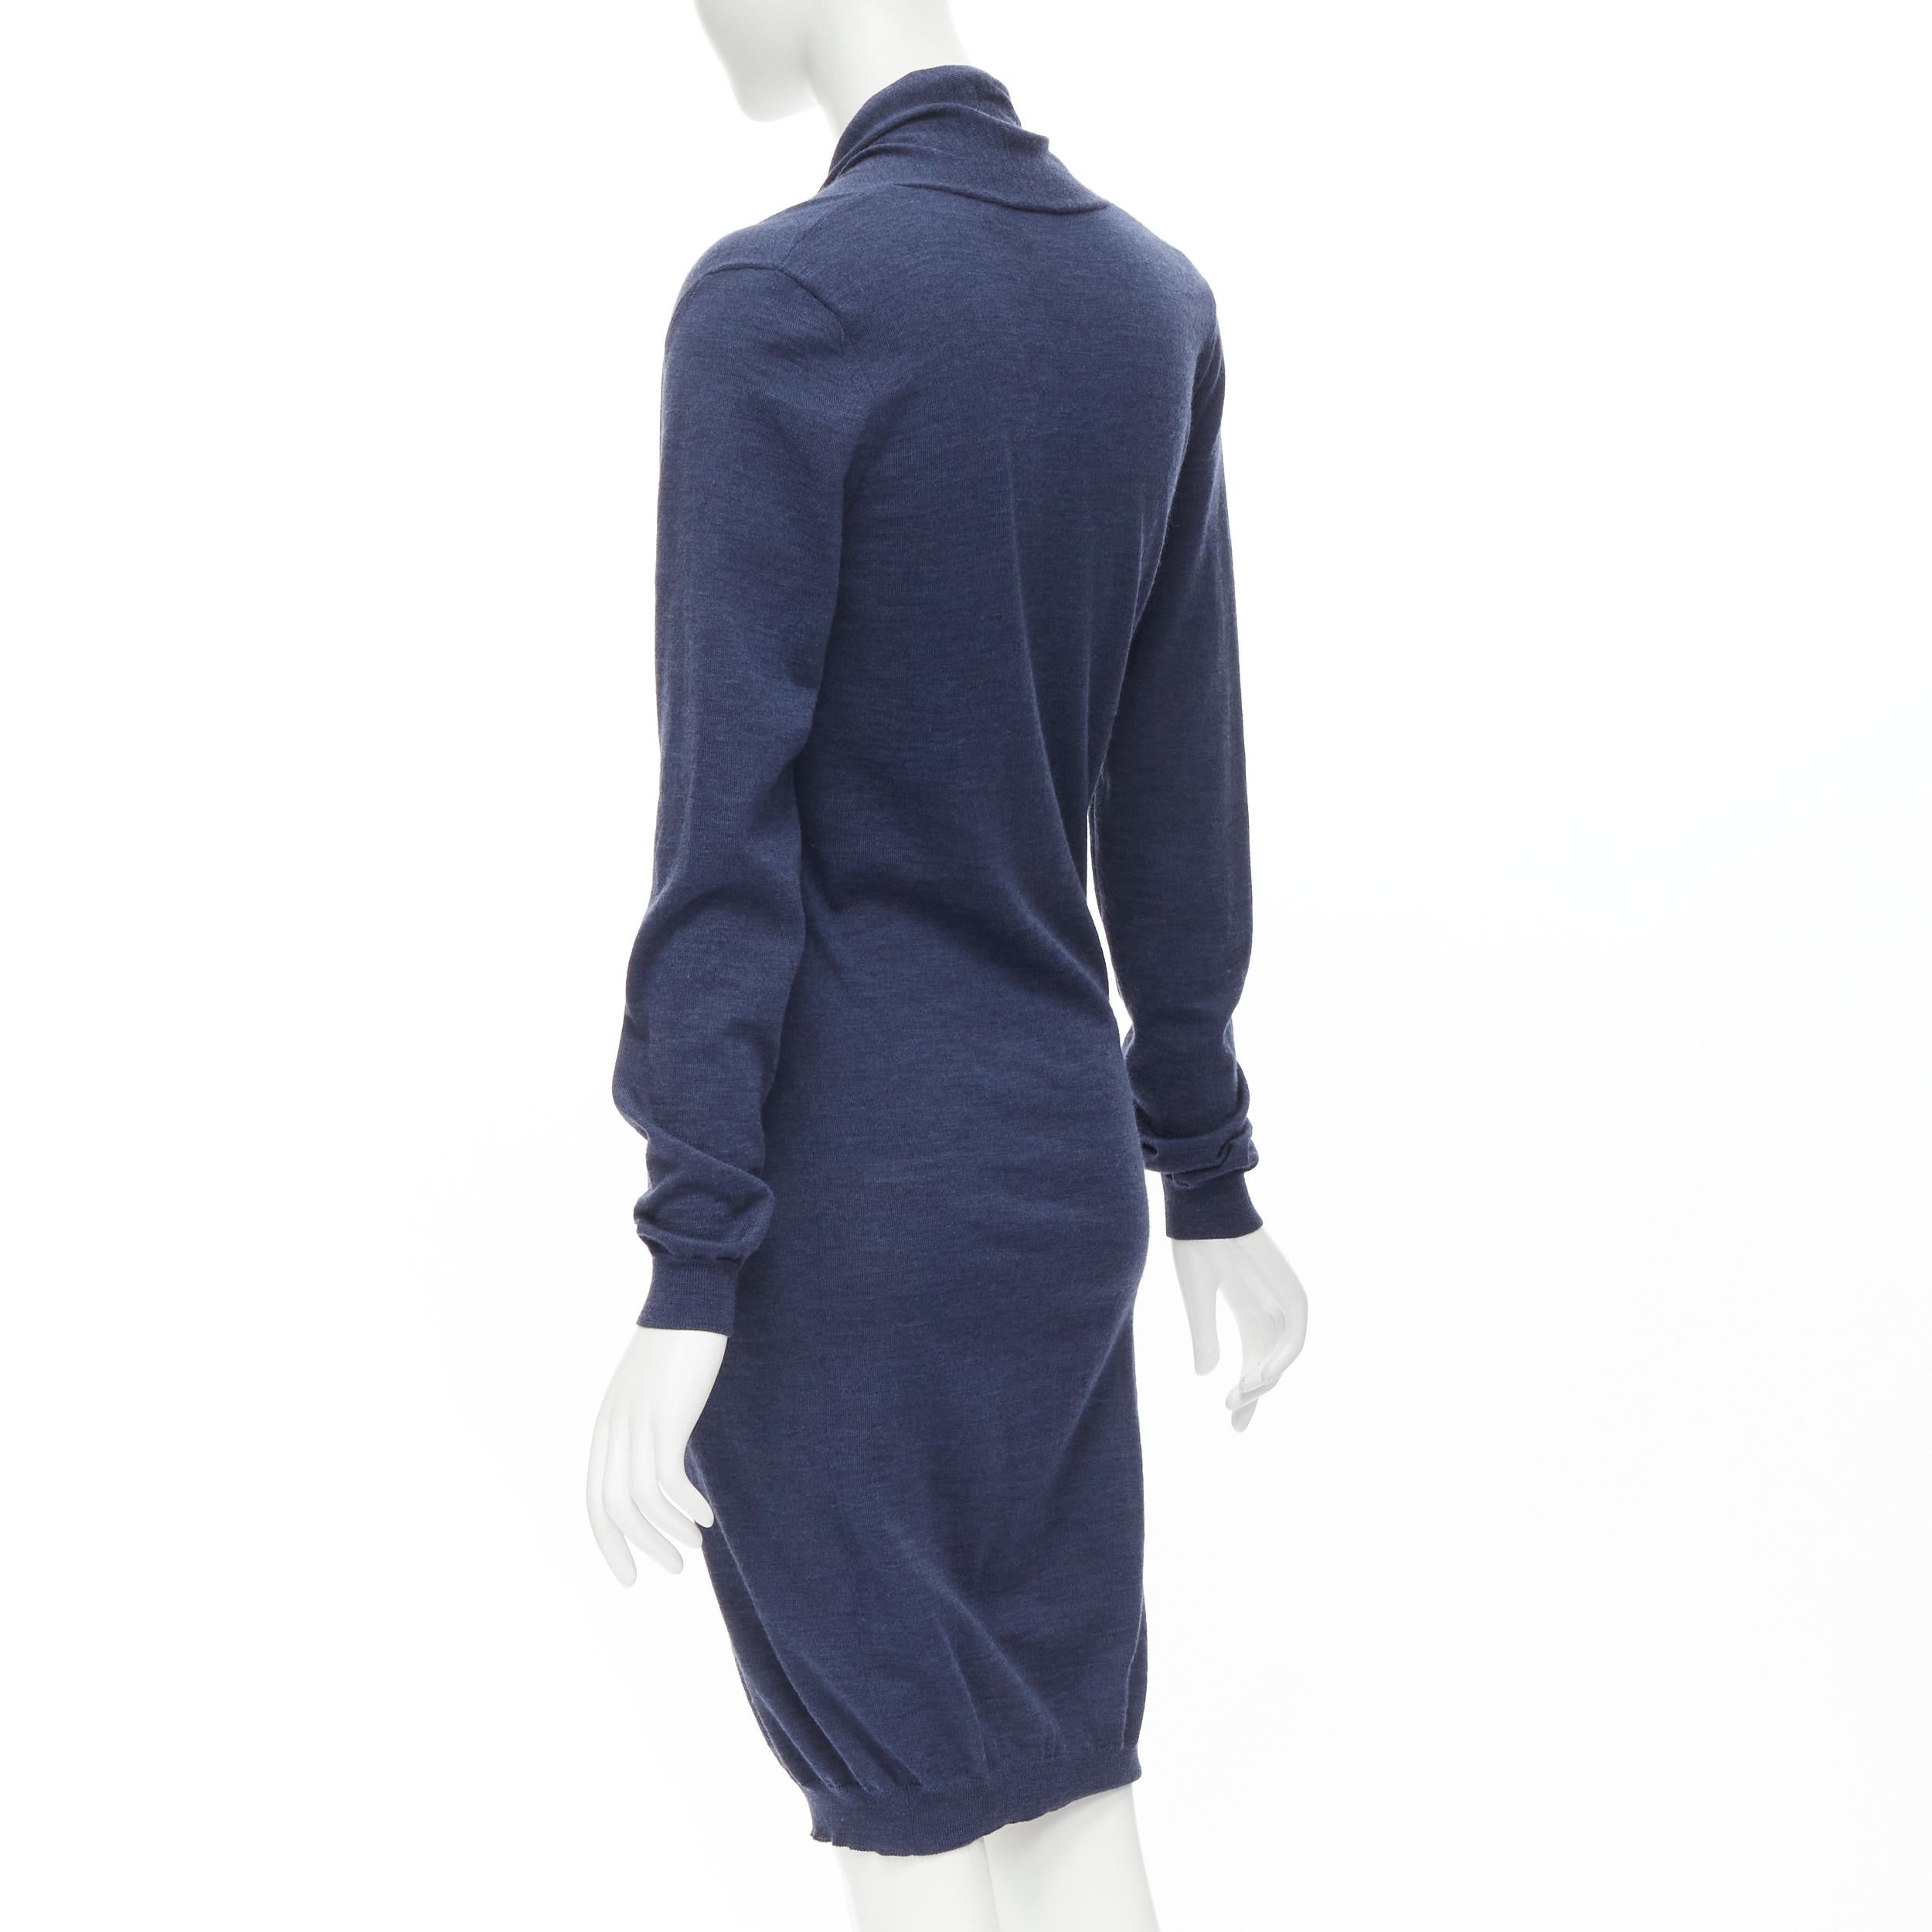 LANVIN Alber Elbaz Les 10 Ans 100% wool wrap neckline knitted dress S In Excellent Condition In Hong Kong, NT